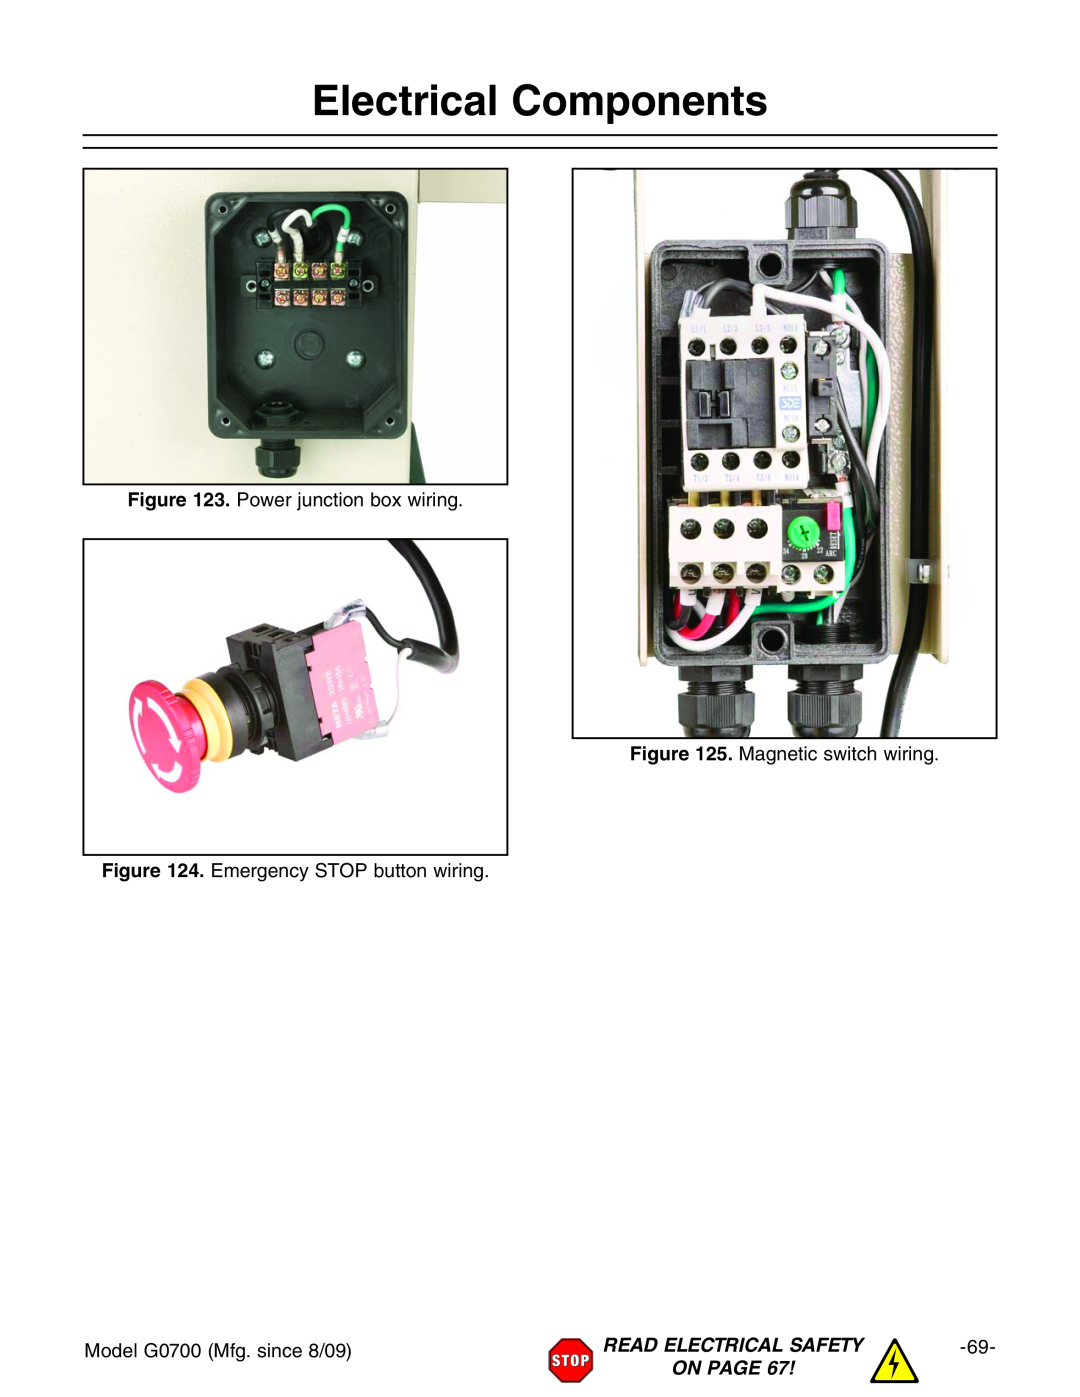 Grizzly G0700 Electrical Components, Power junction box wiring, Emergency STOP button wiring, Magnetic switch wiring 